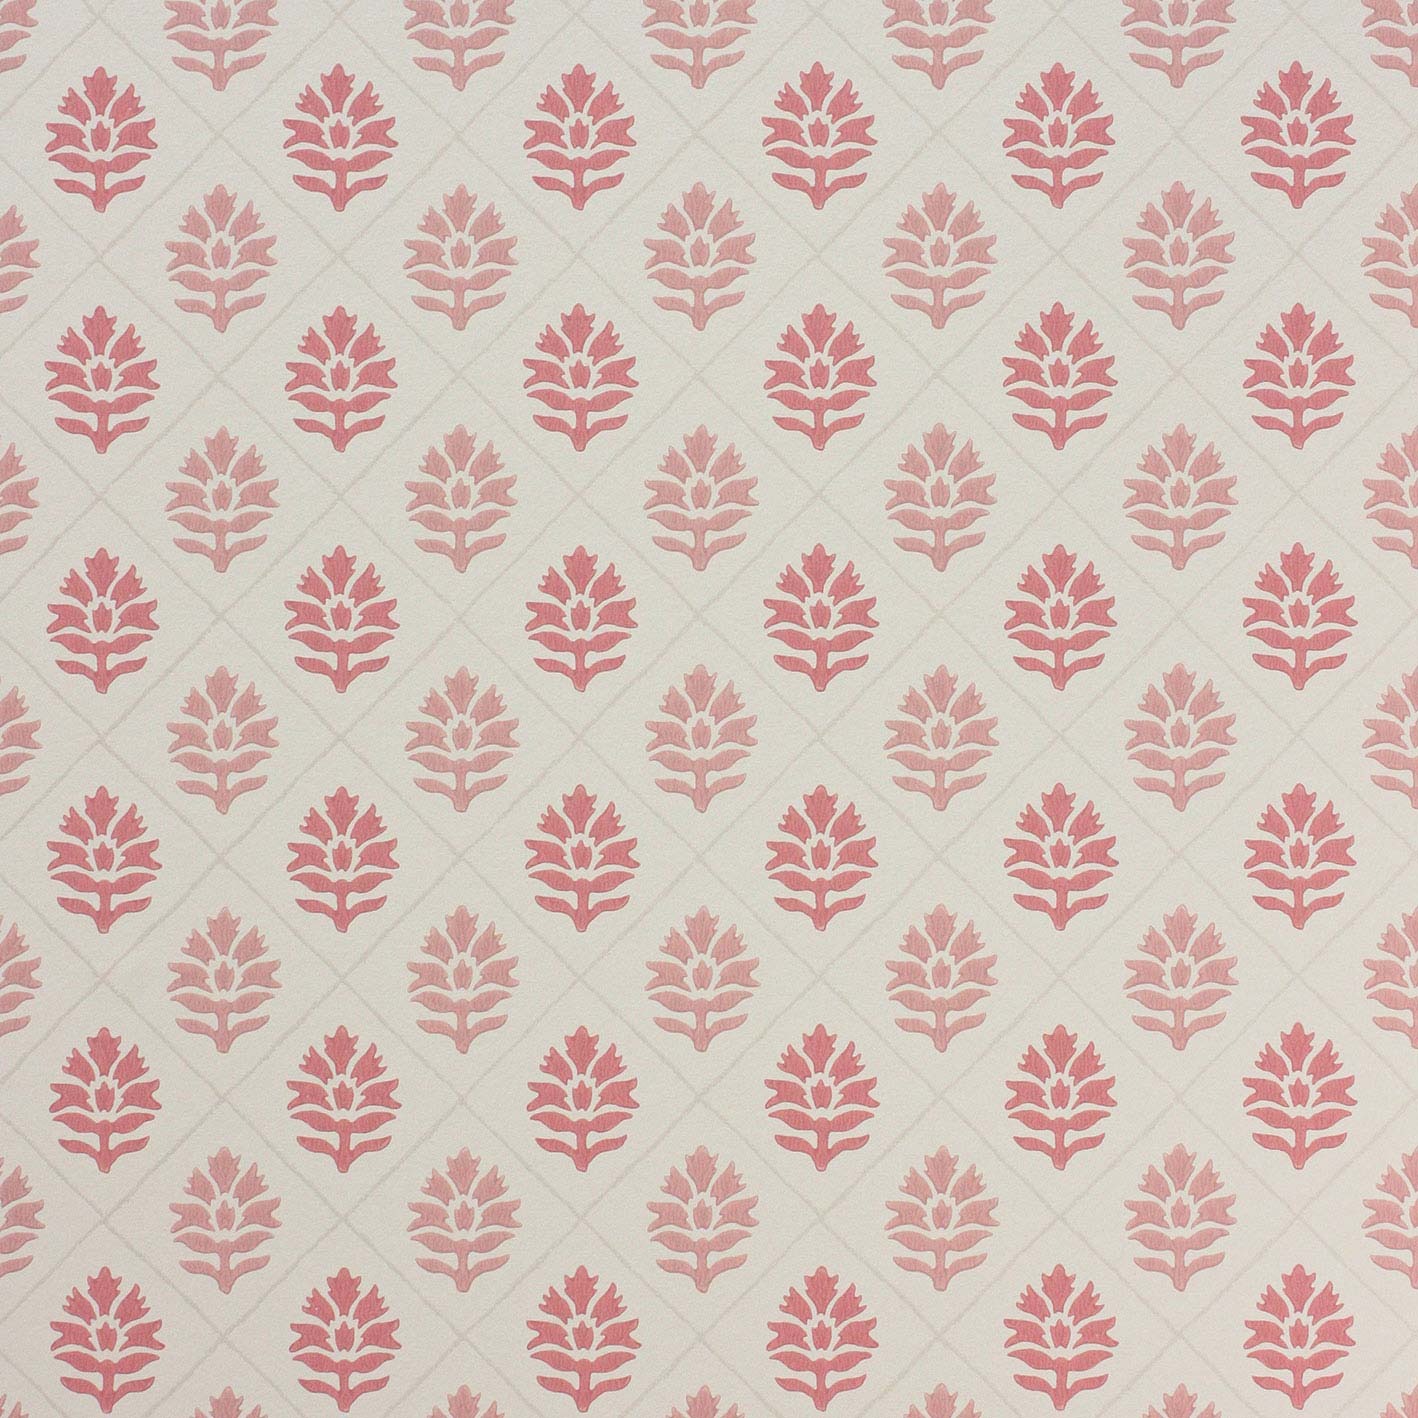 Nina Campbell Wallpaper - Les Rêves Camille Coral/Pink NCW4303-05